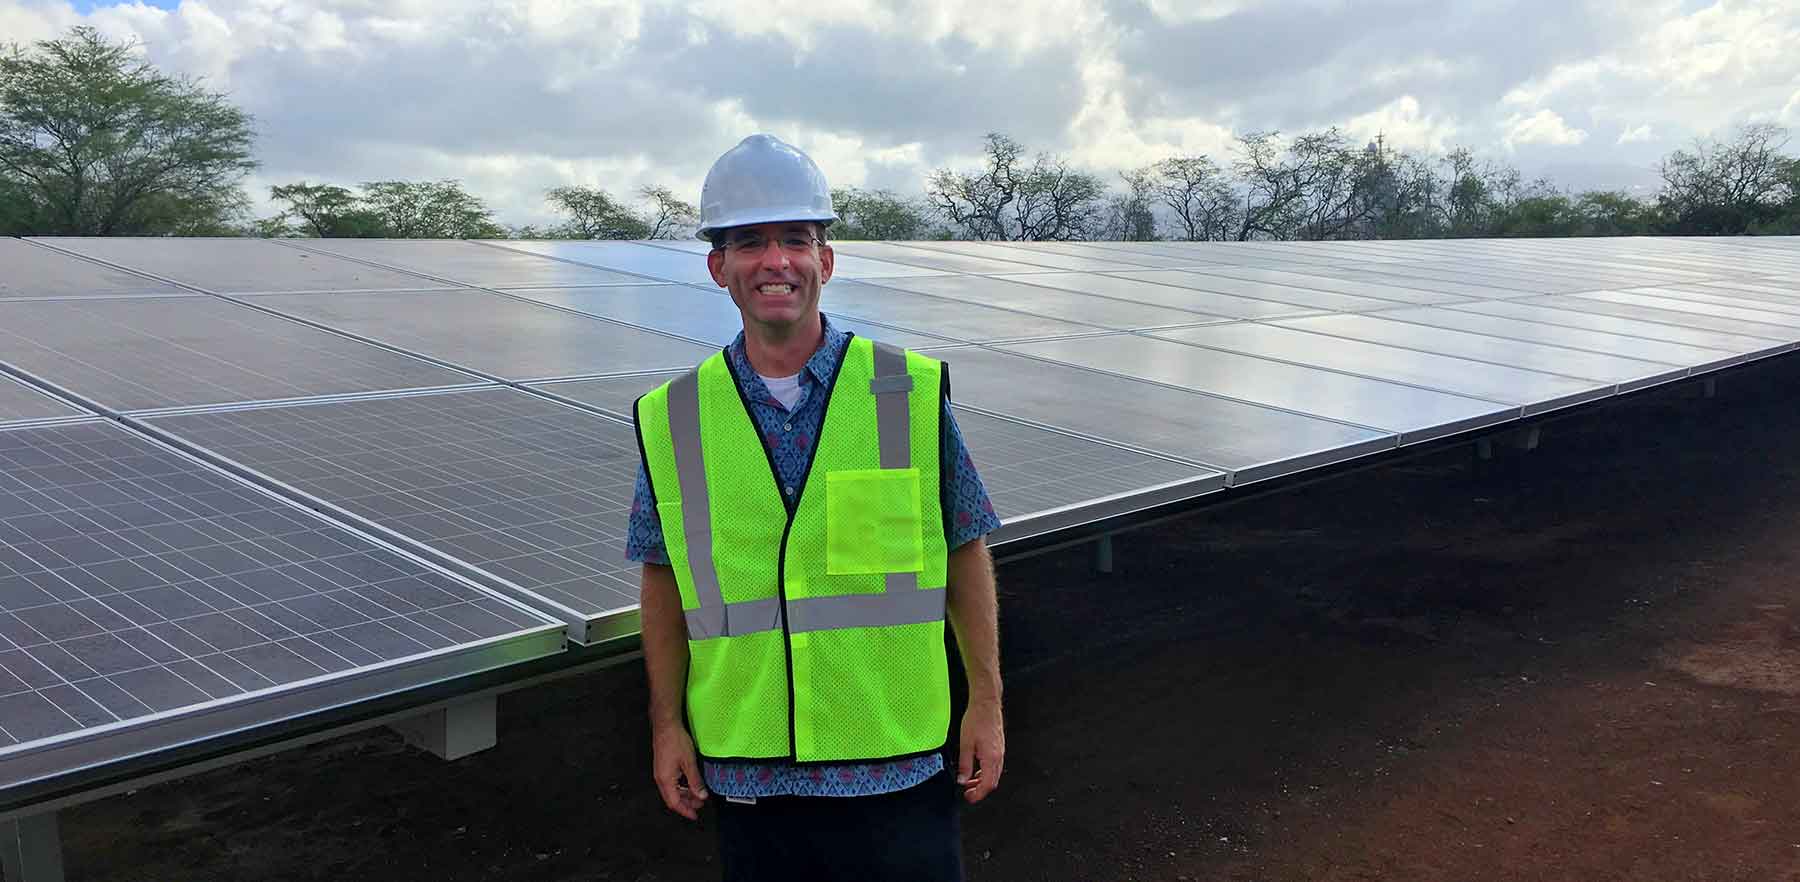  A man in a hard hat stands in front of an array of solar panels.